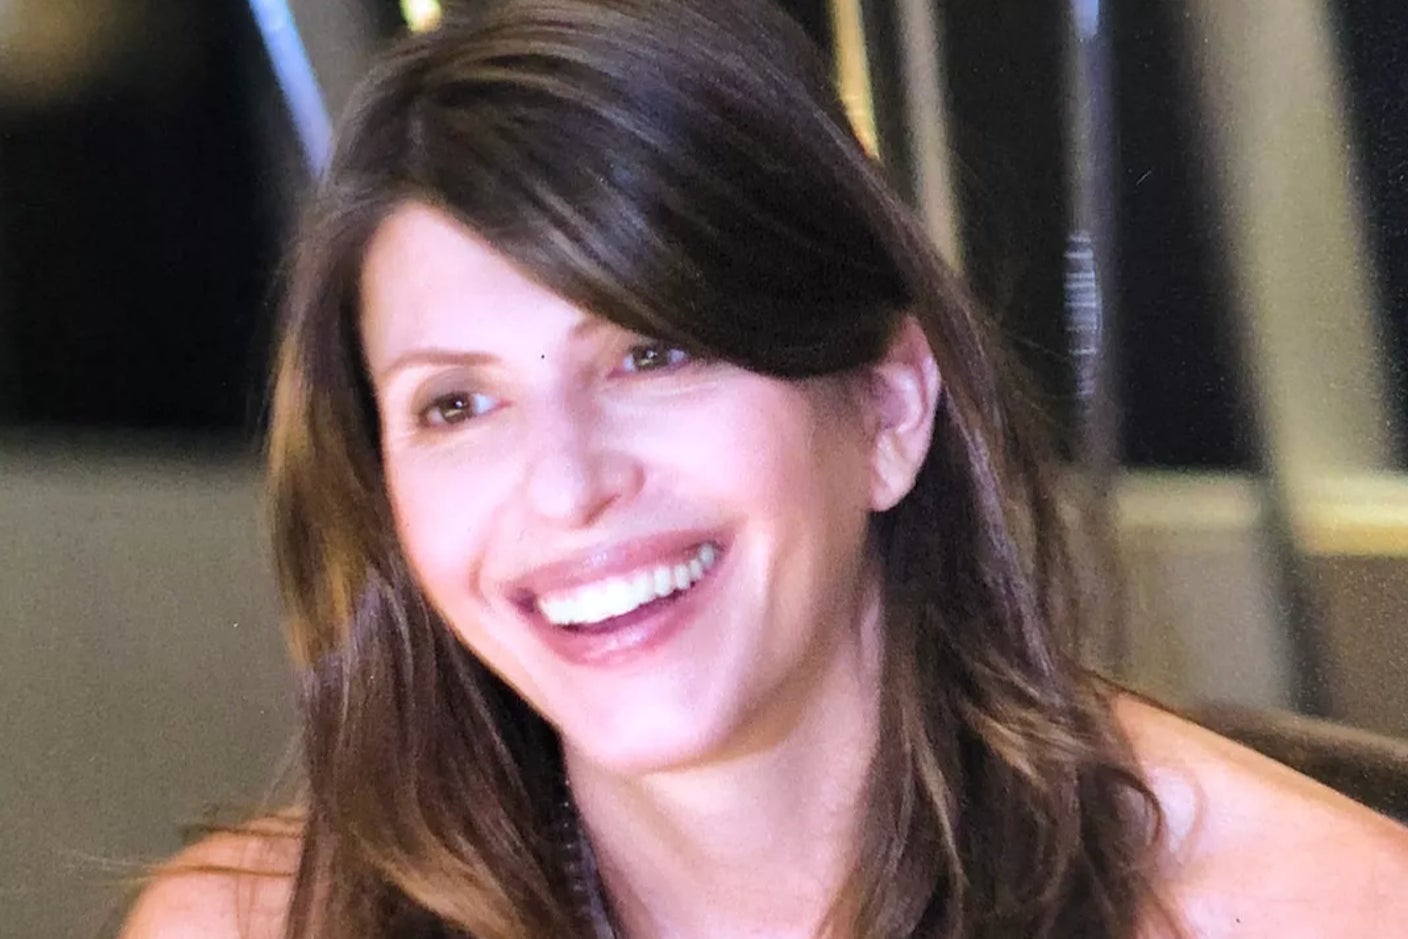 Jennifer Dulos has been missing since 24 May 2019